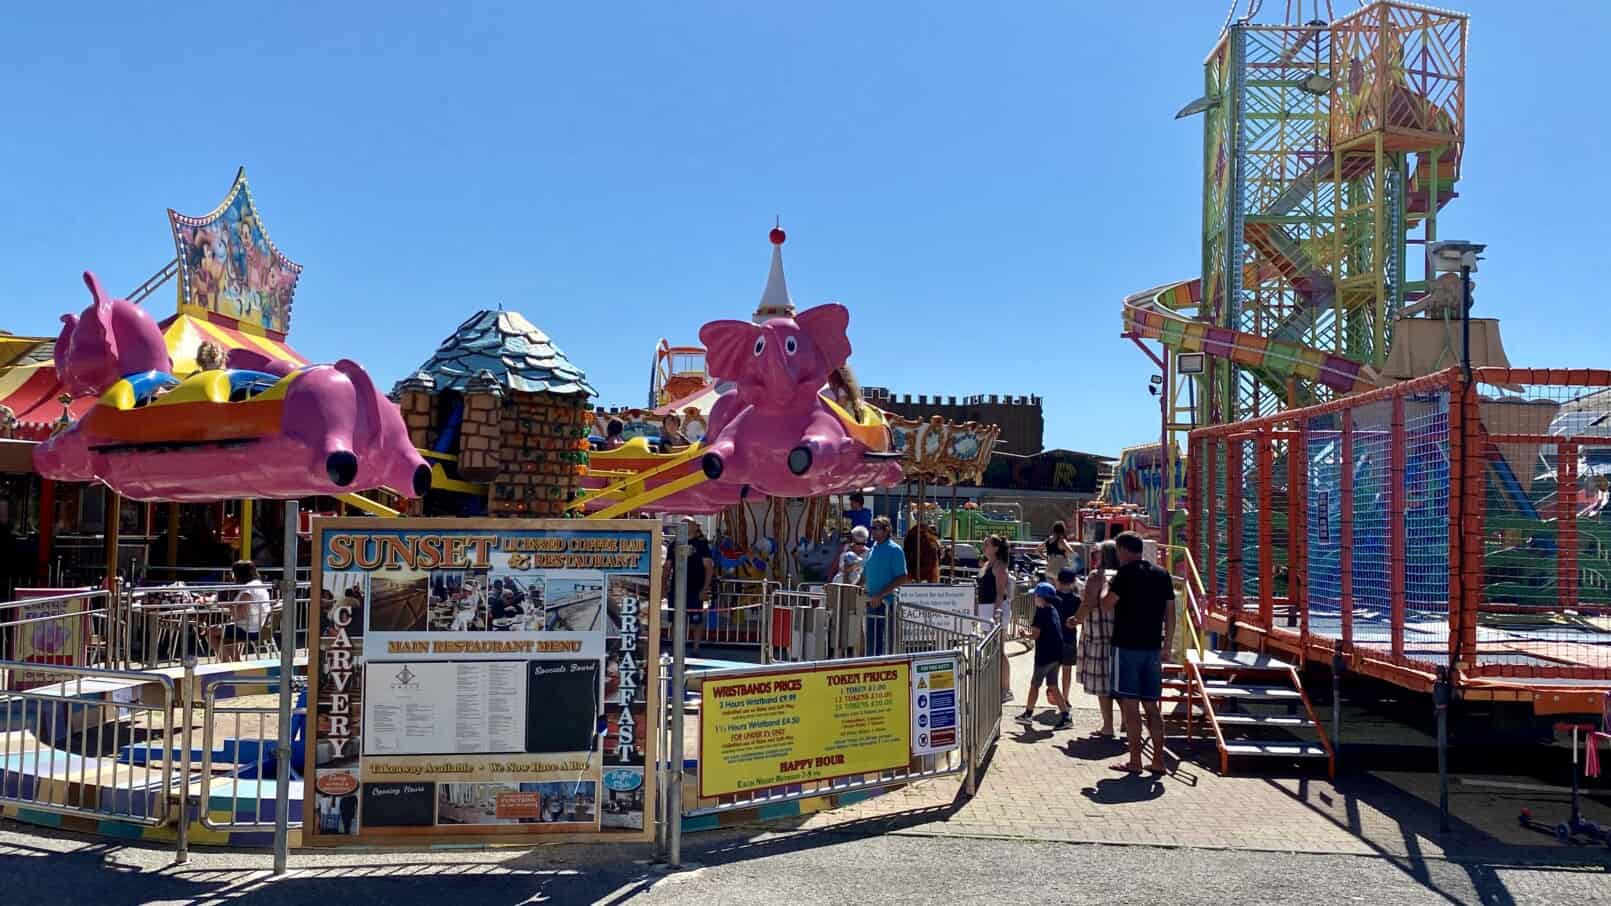 Fantasy Island Fun Park - Love Weymouth Tourist Information & Events Guide